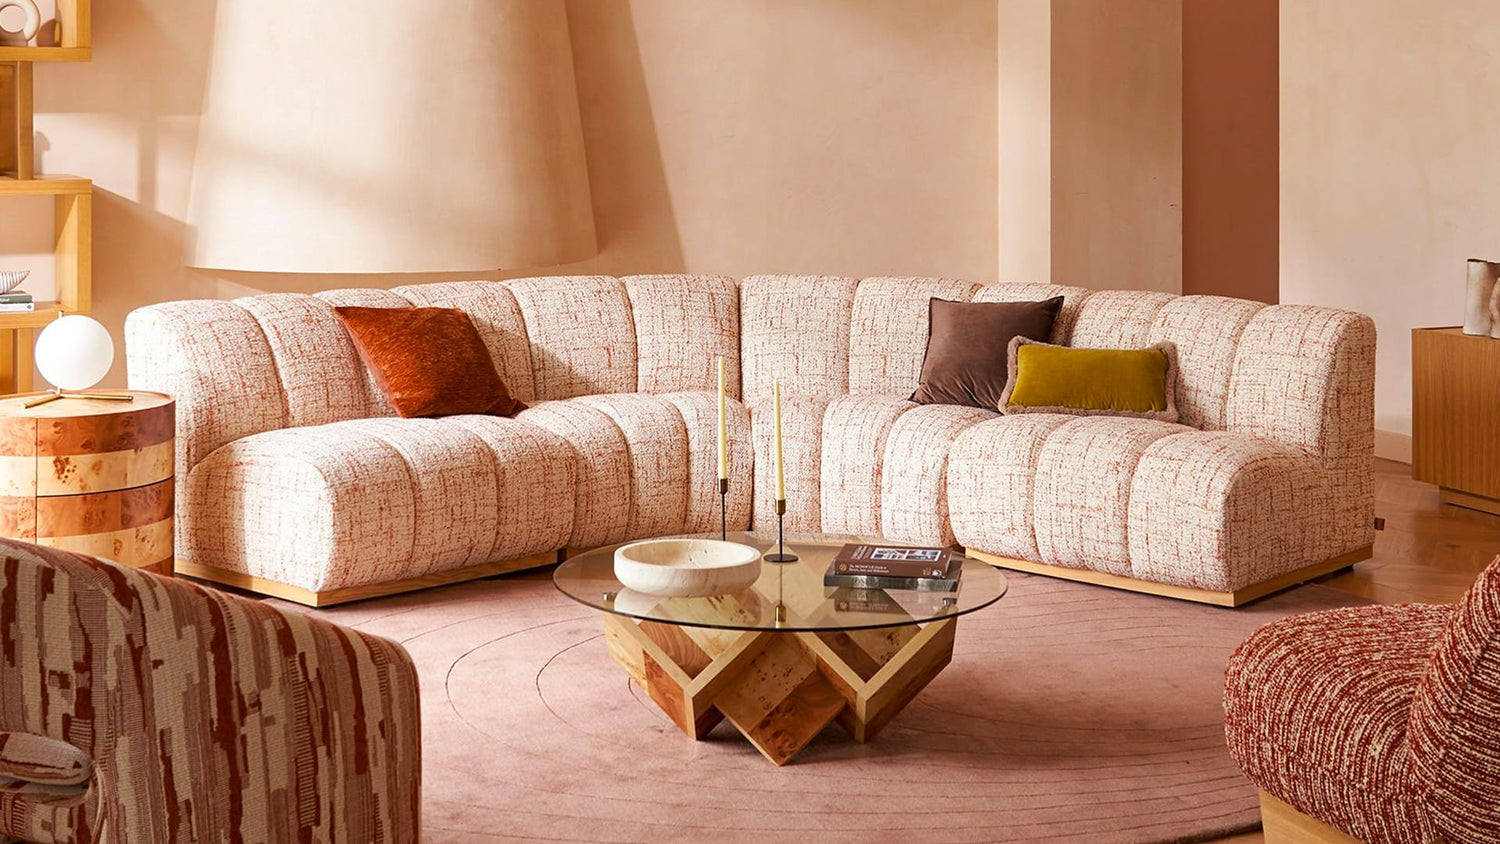 A warmly lit living room featuring a peach-colored, textured sectional sofa with various pillows, including a brown and a mustard yellow one. A round glass coffee table with a geometric wooden base sits on a circular area rug. Shelves and a lamp are in the background.